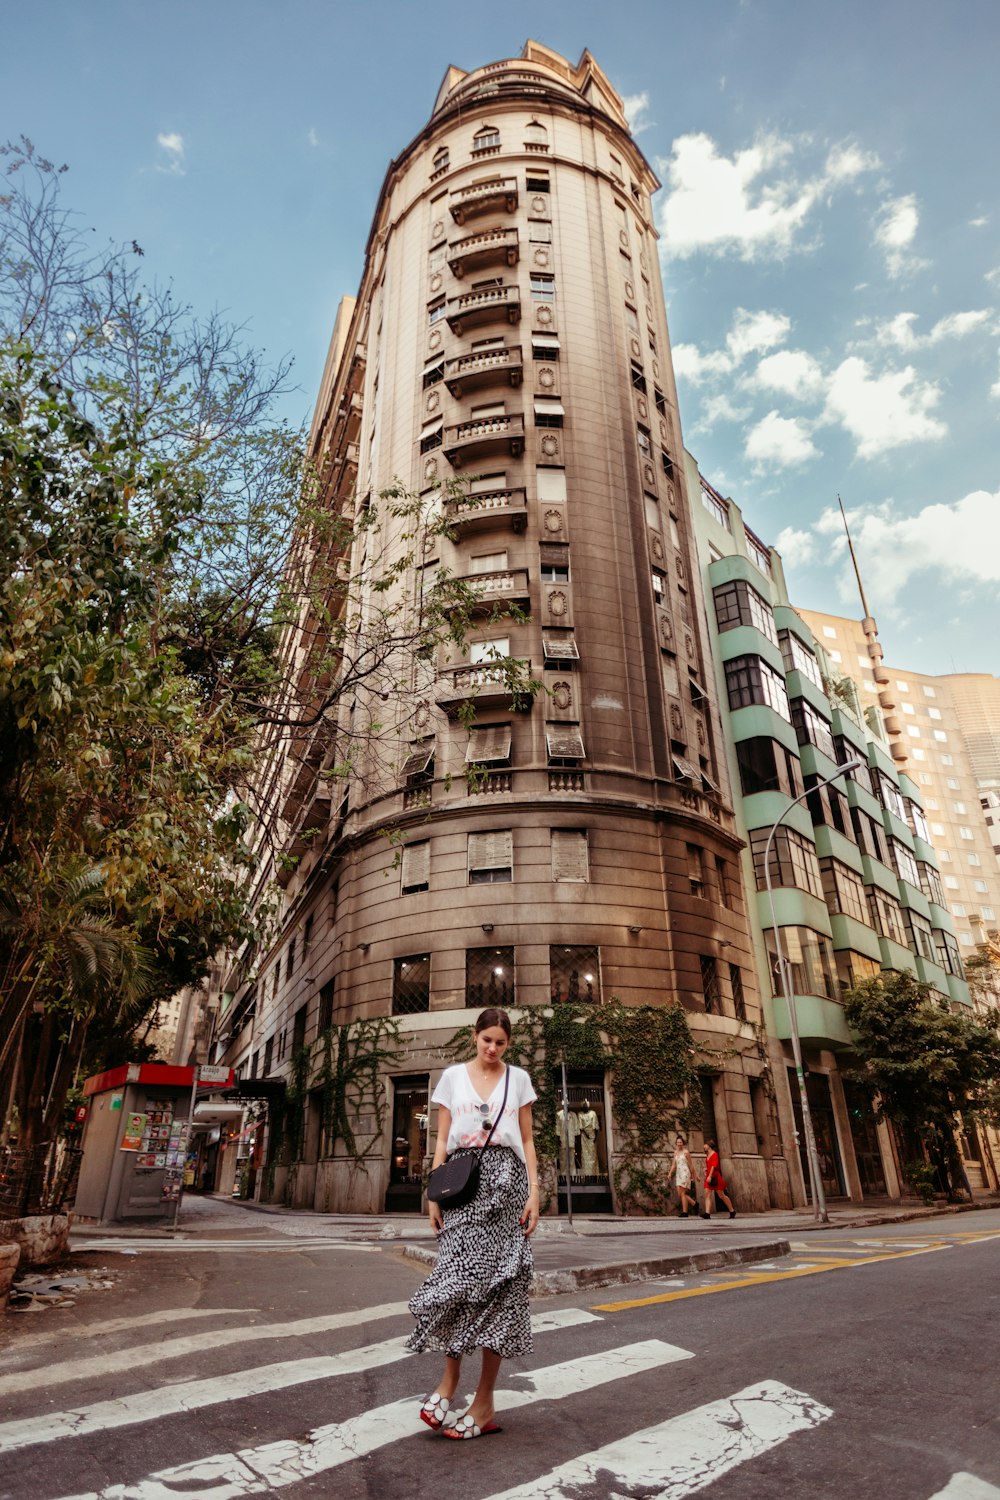 a woman crossing the street in front of a tall building